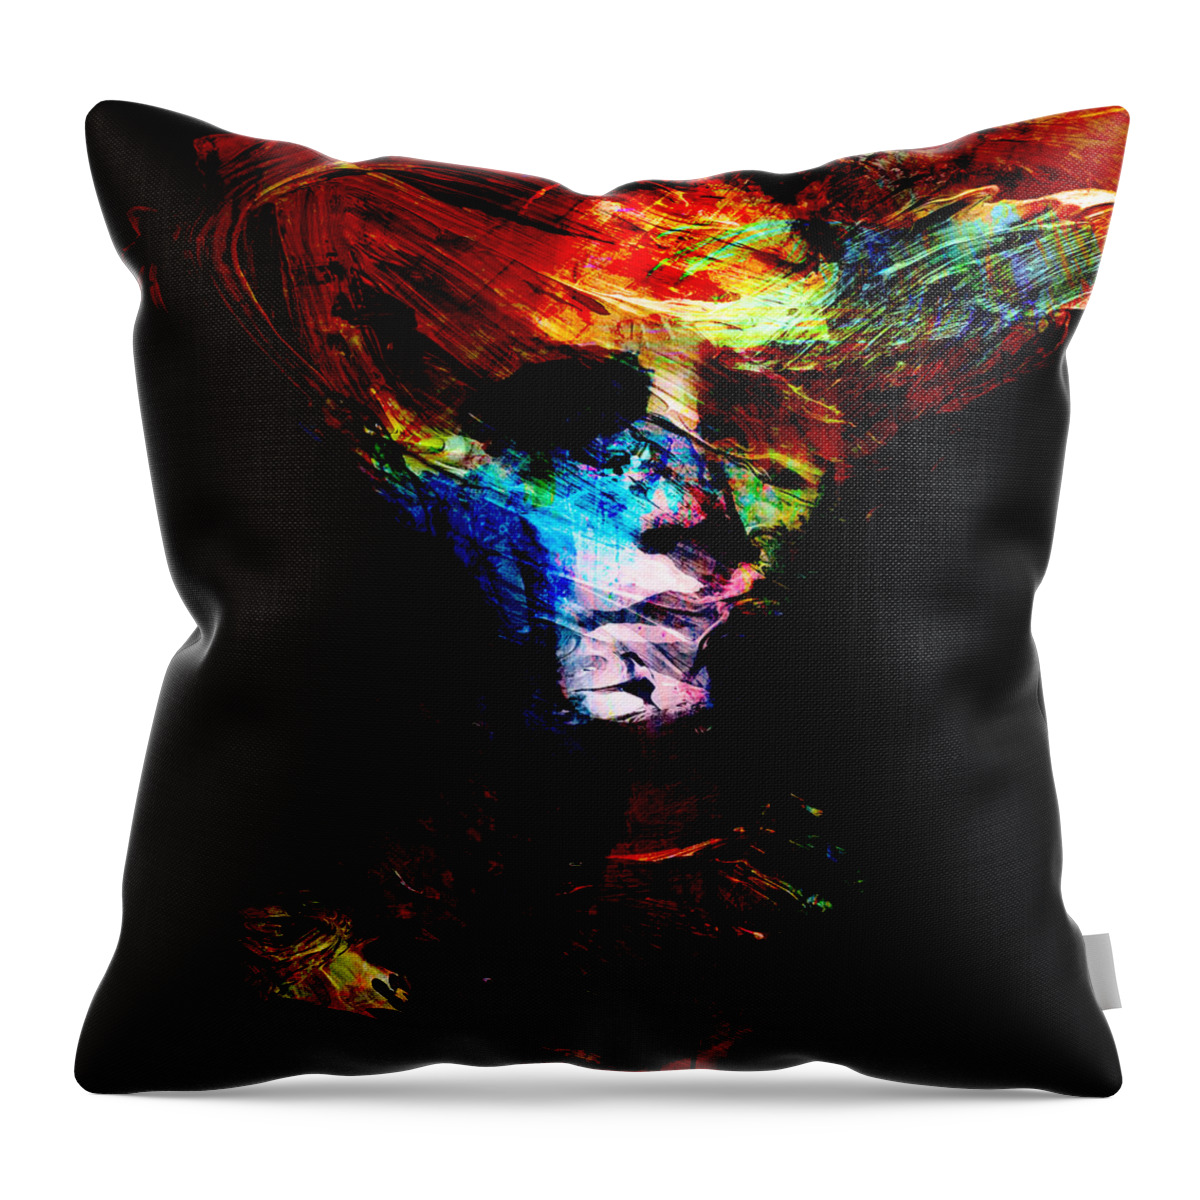 Marian Voicu Throw Pillow featuring the digital art Abstract Ghost by Marian Voicu